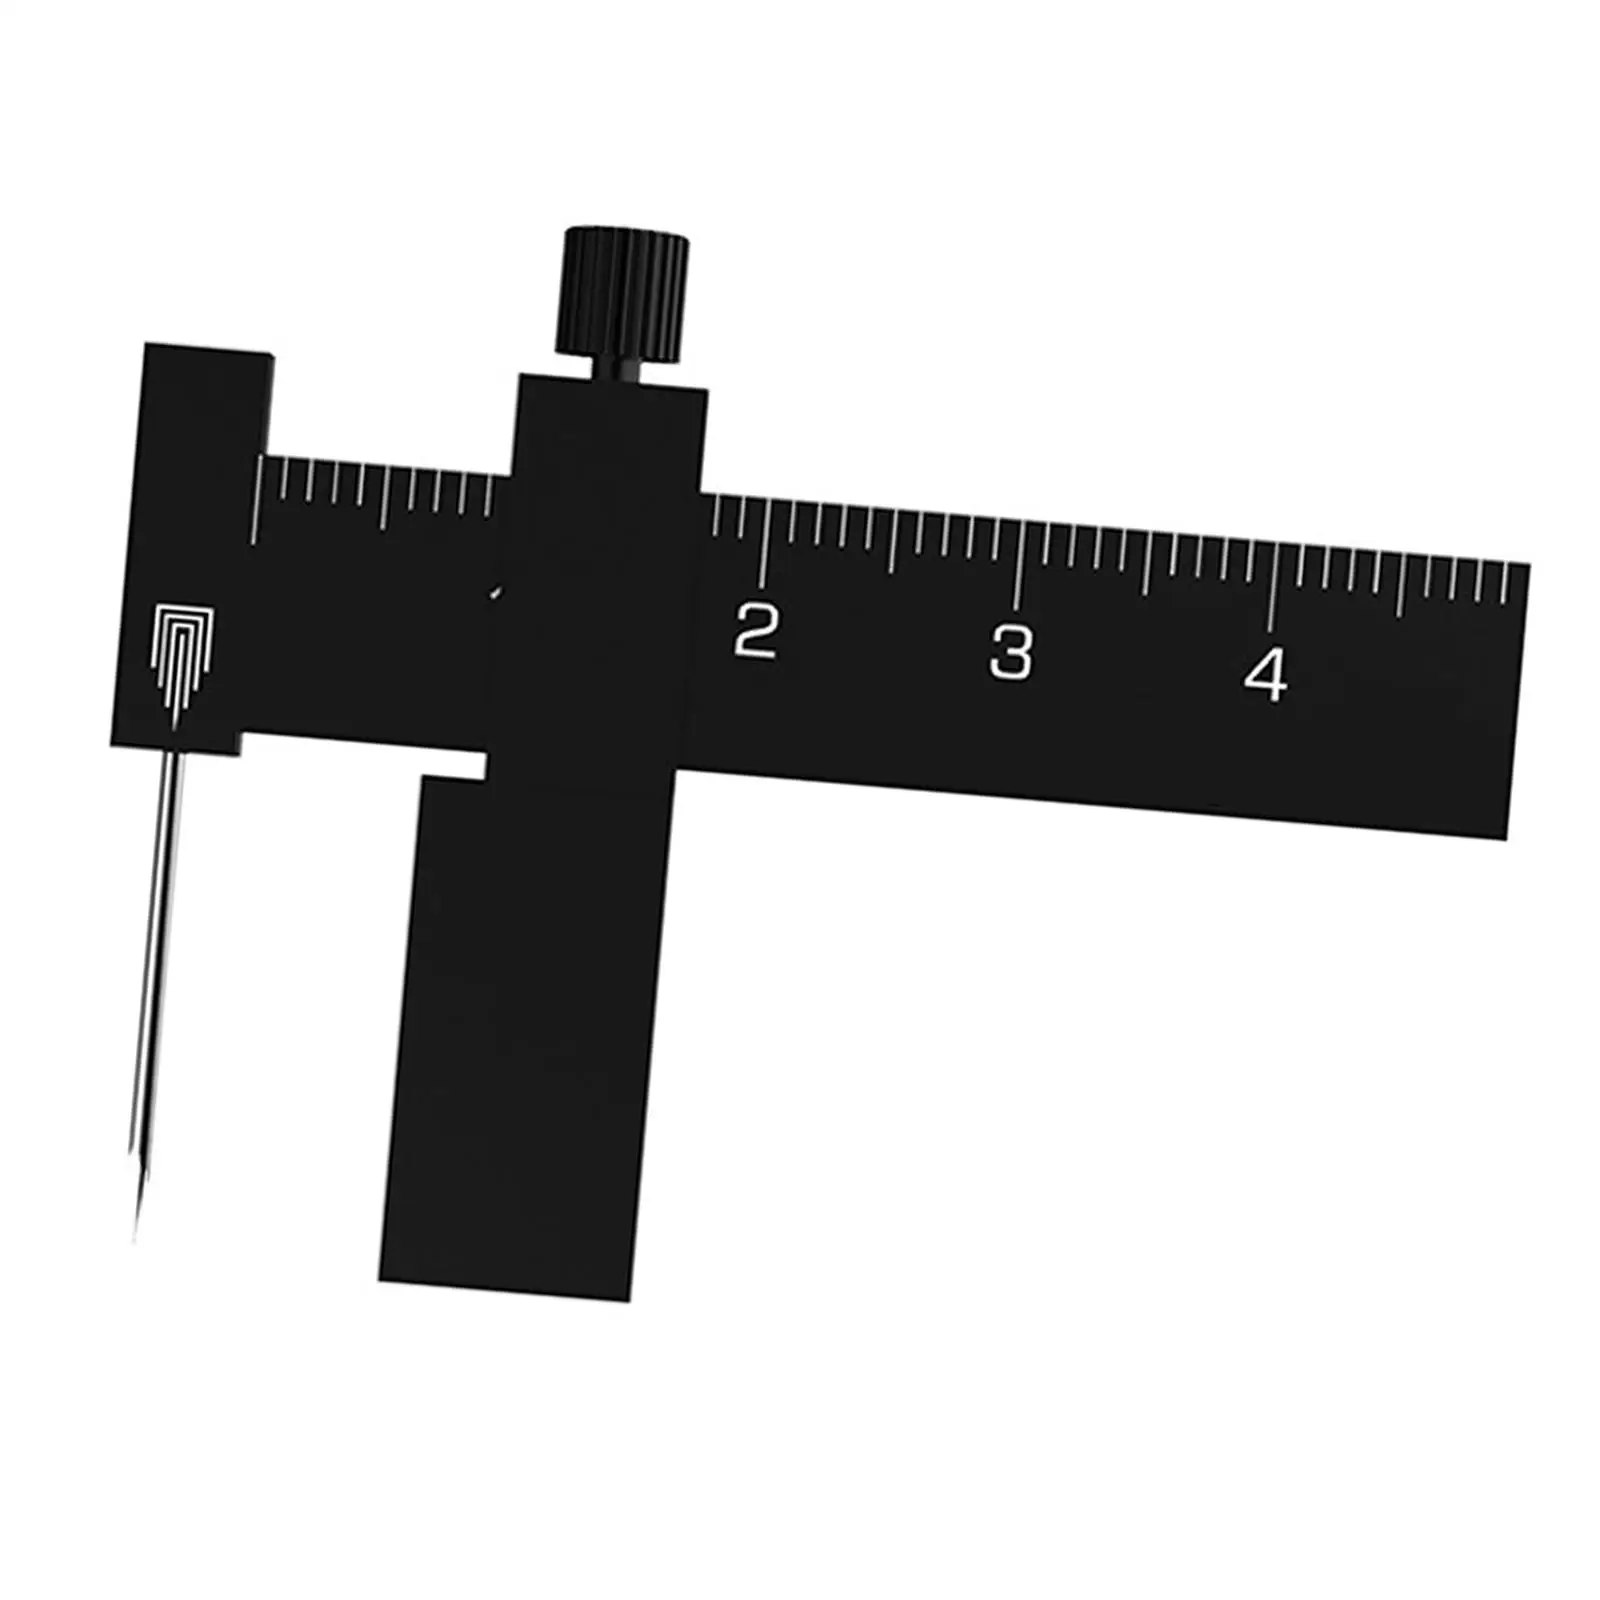 Equidistant Parallel Scriber T14A03 Carving Ruler for Mechanical Engineering Scale Model Modeler Craft Tool Crafting Drafting